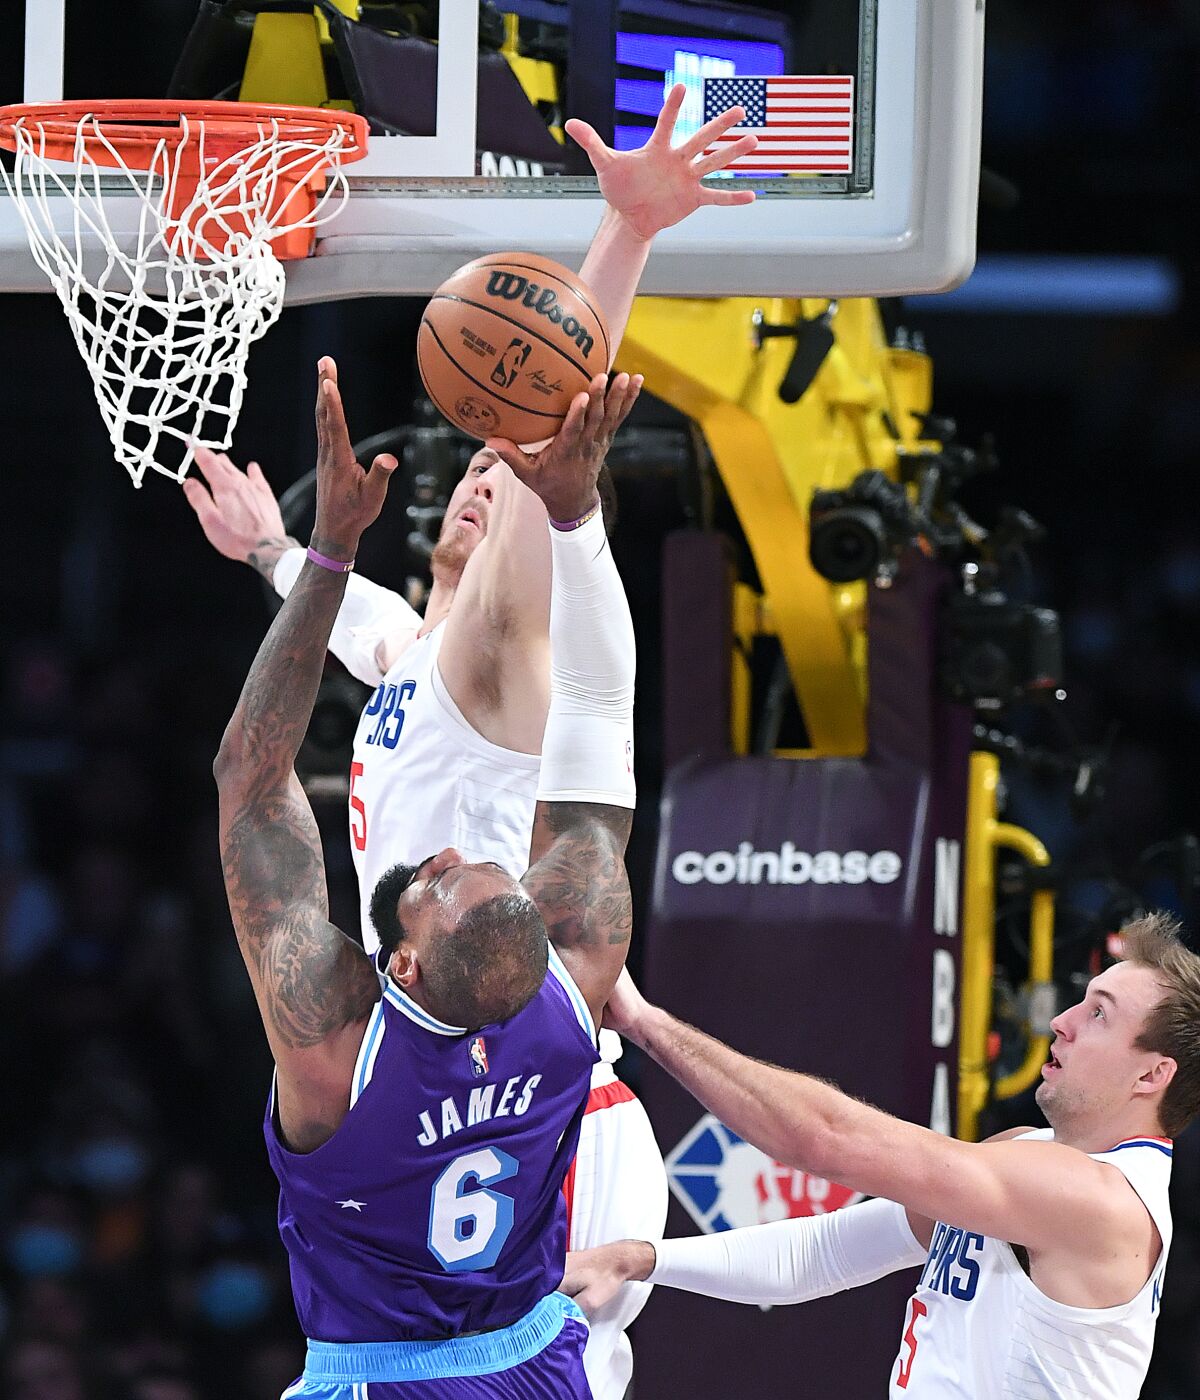 Lakers forward LeBron James attempts a layup while defended by Clippers guard Luke Kennard and center Isaiah Hartenstein.